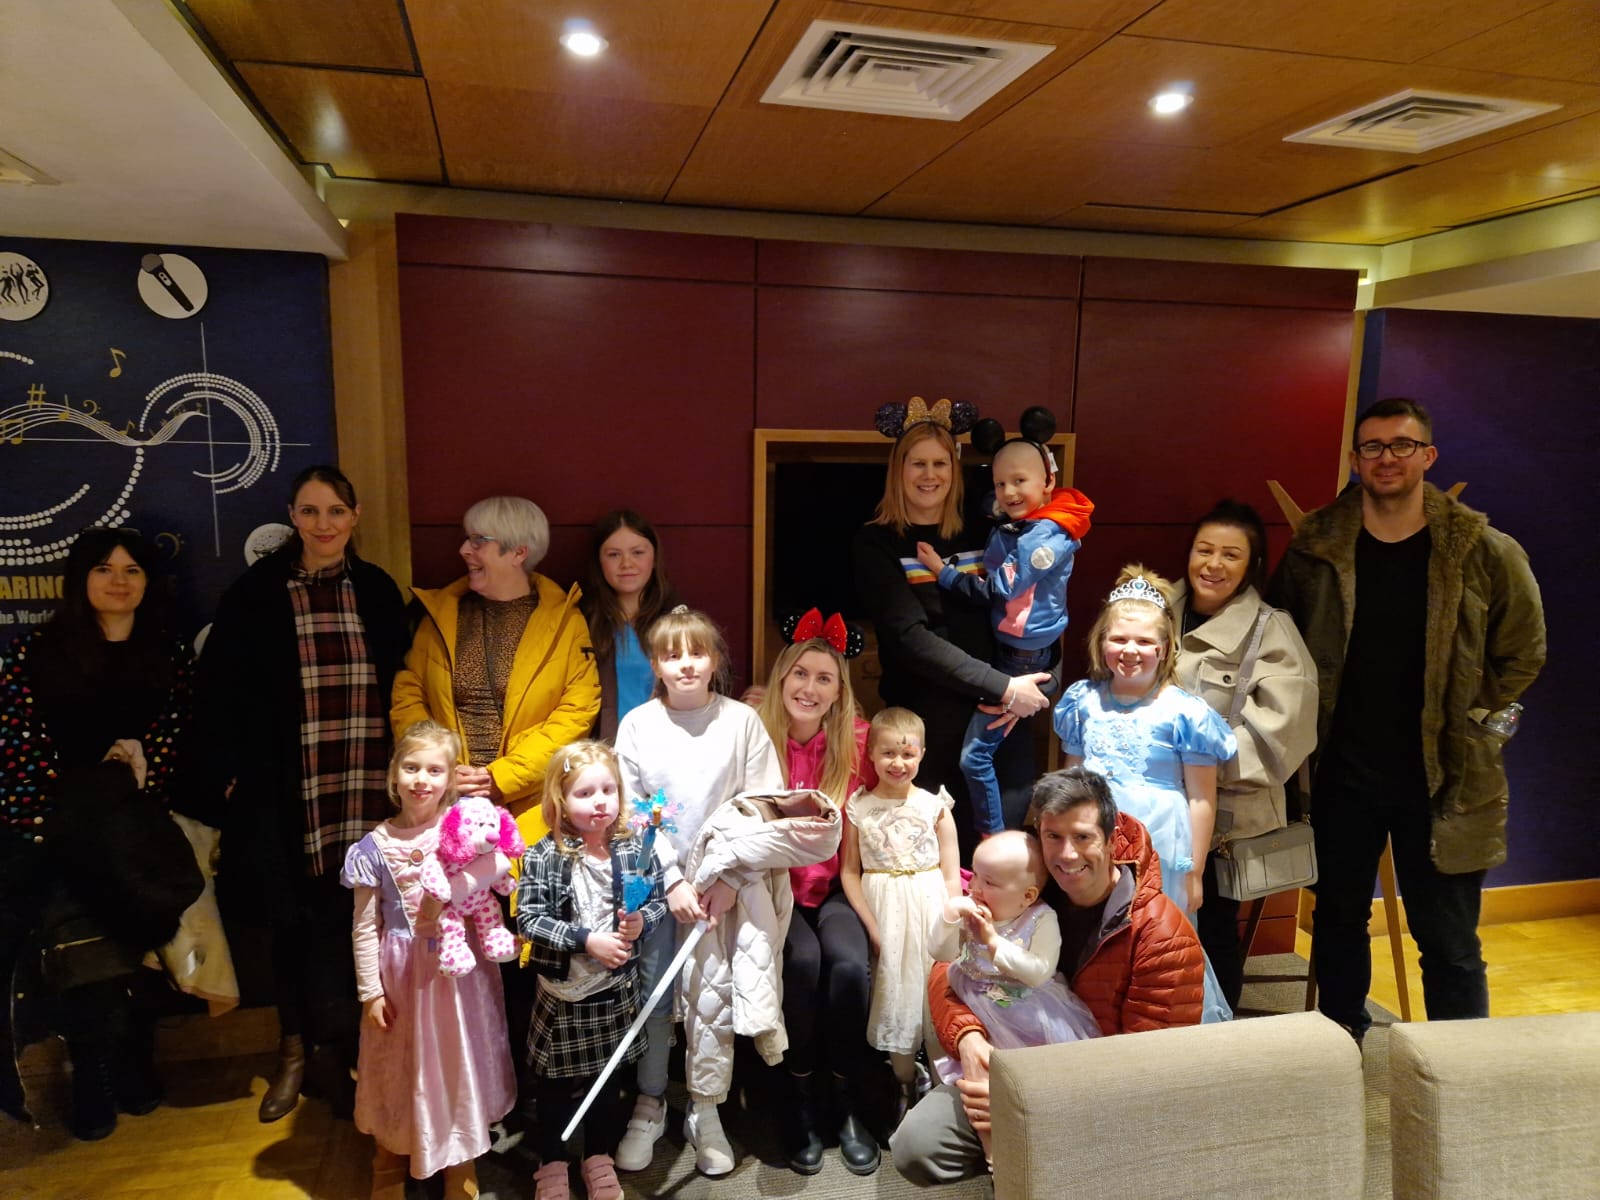 Families of Candlelighters visiting the private suit First Direct Arena for Disney On Ice.